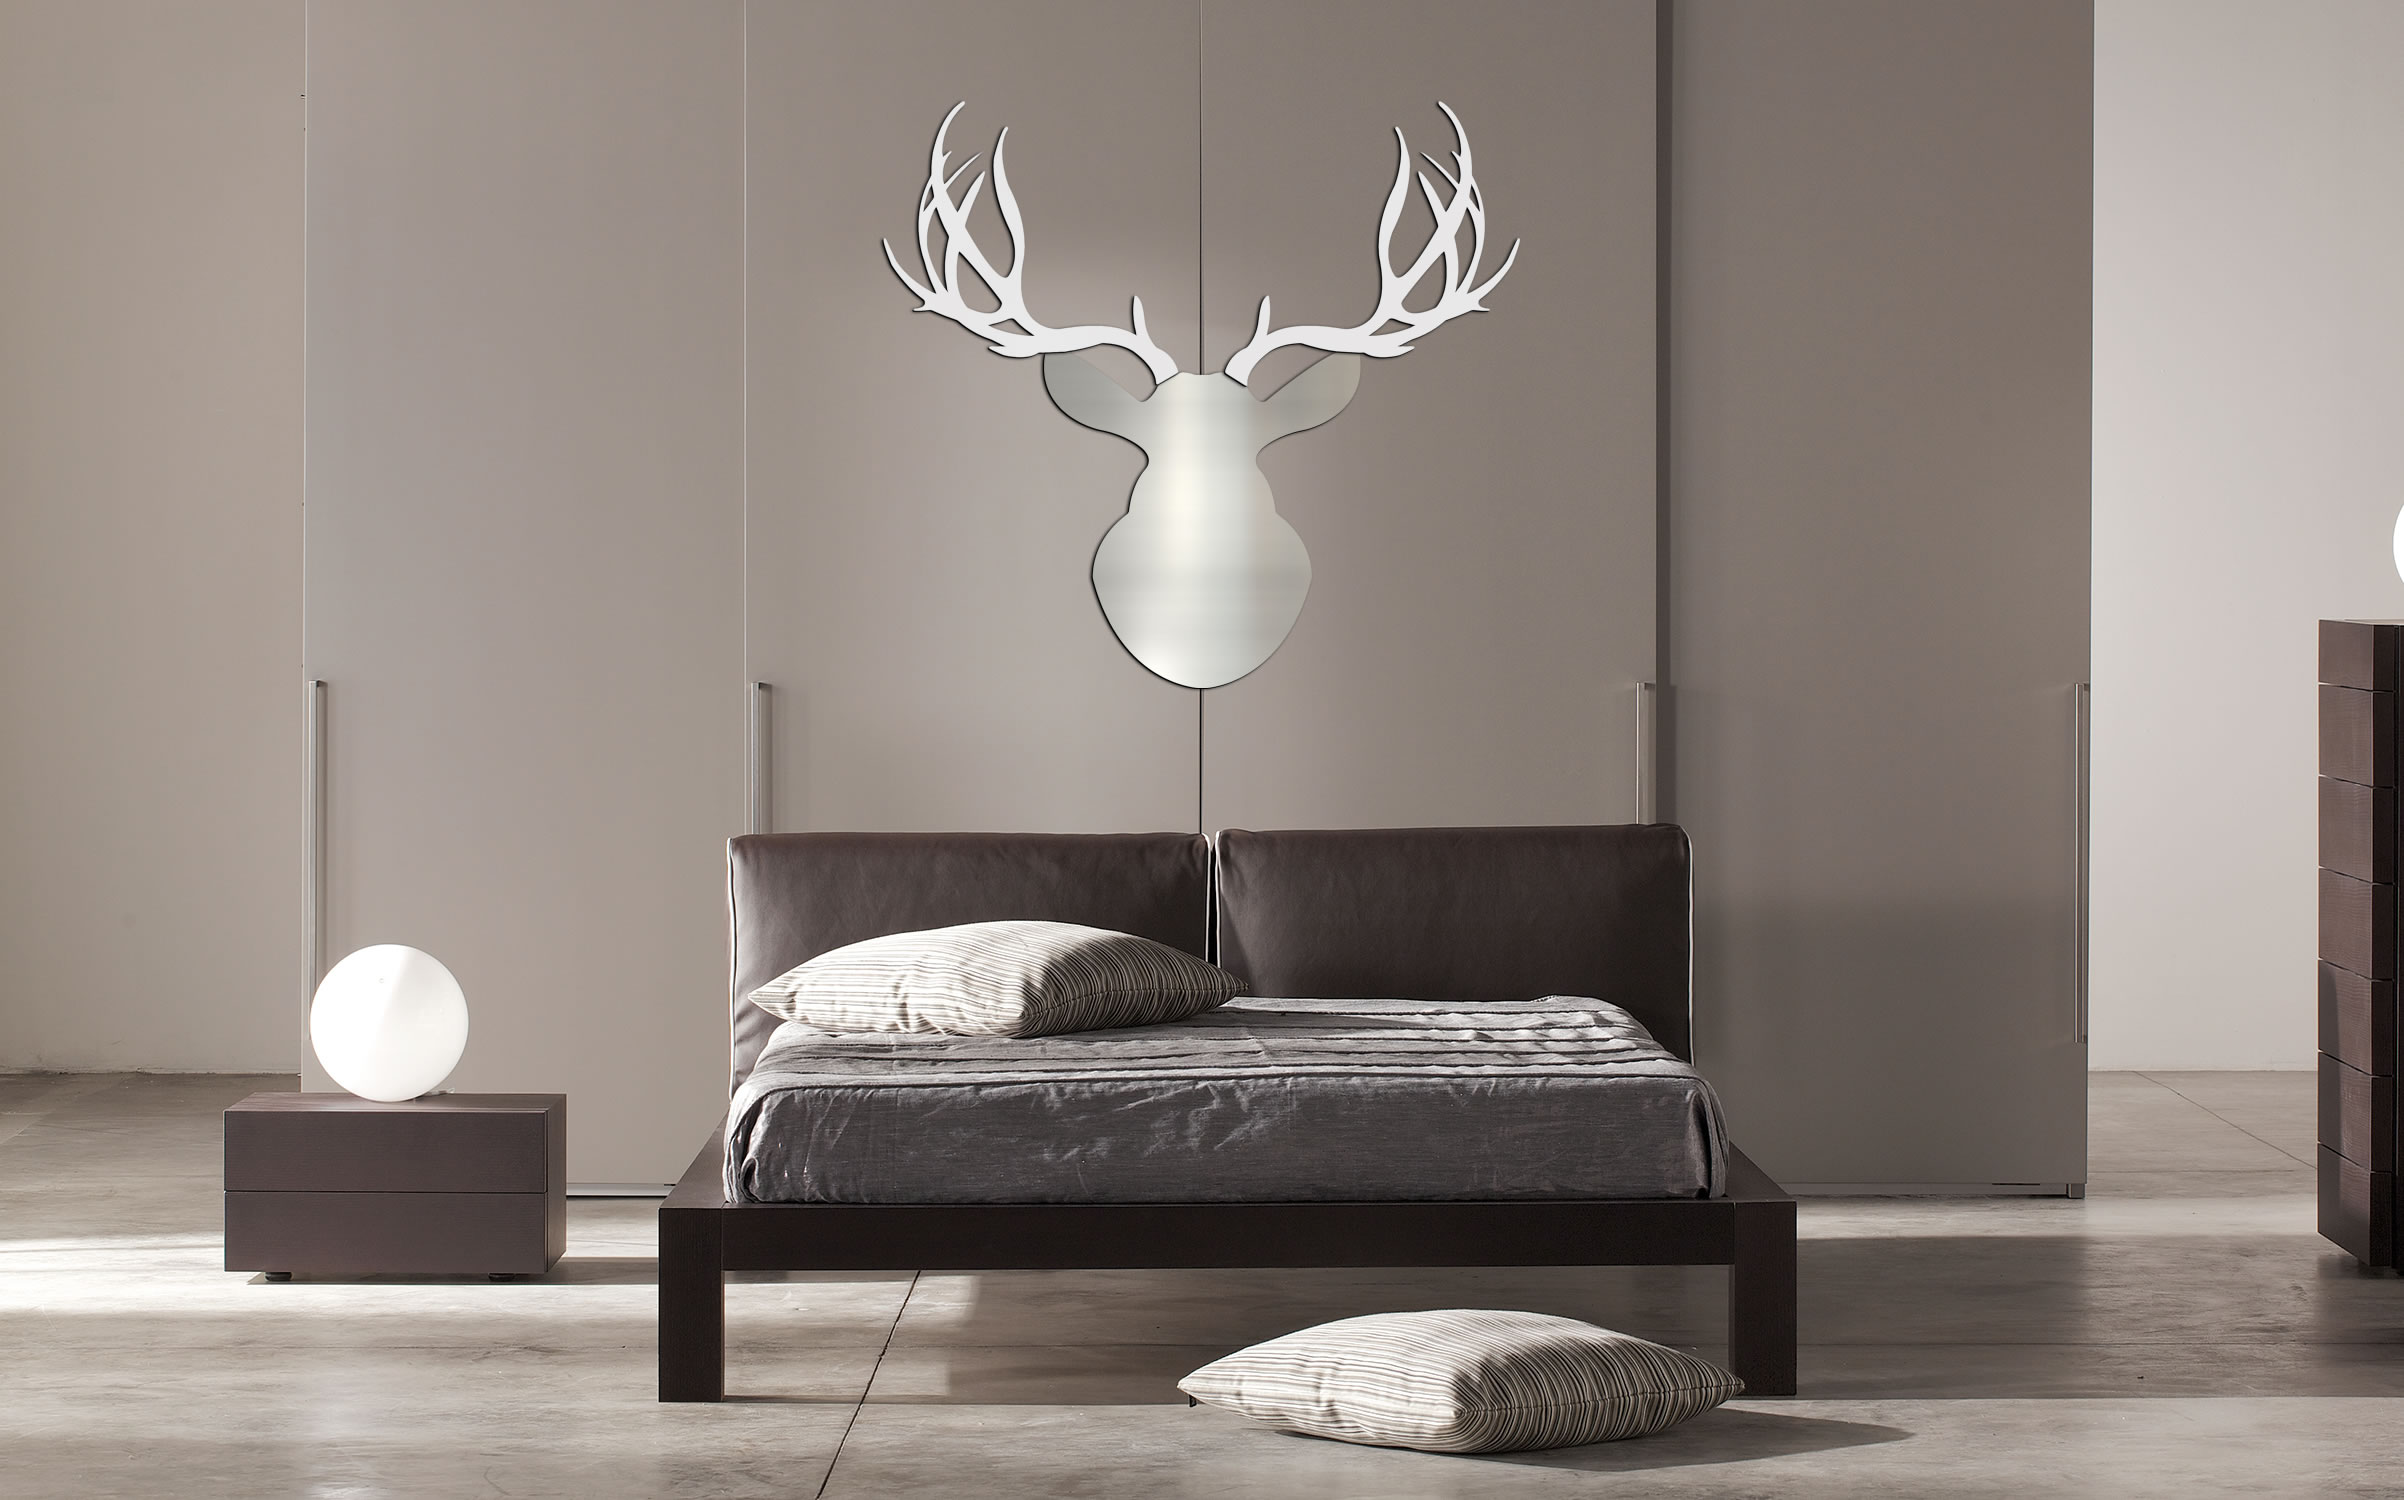 WINTER BUCK - 36x36 in. Silver & White Deer Cut-Out - Lifestyle Image